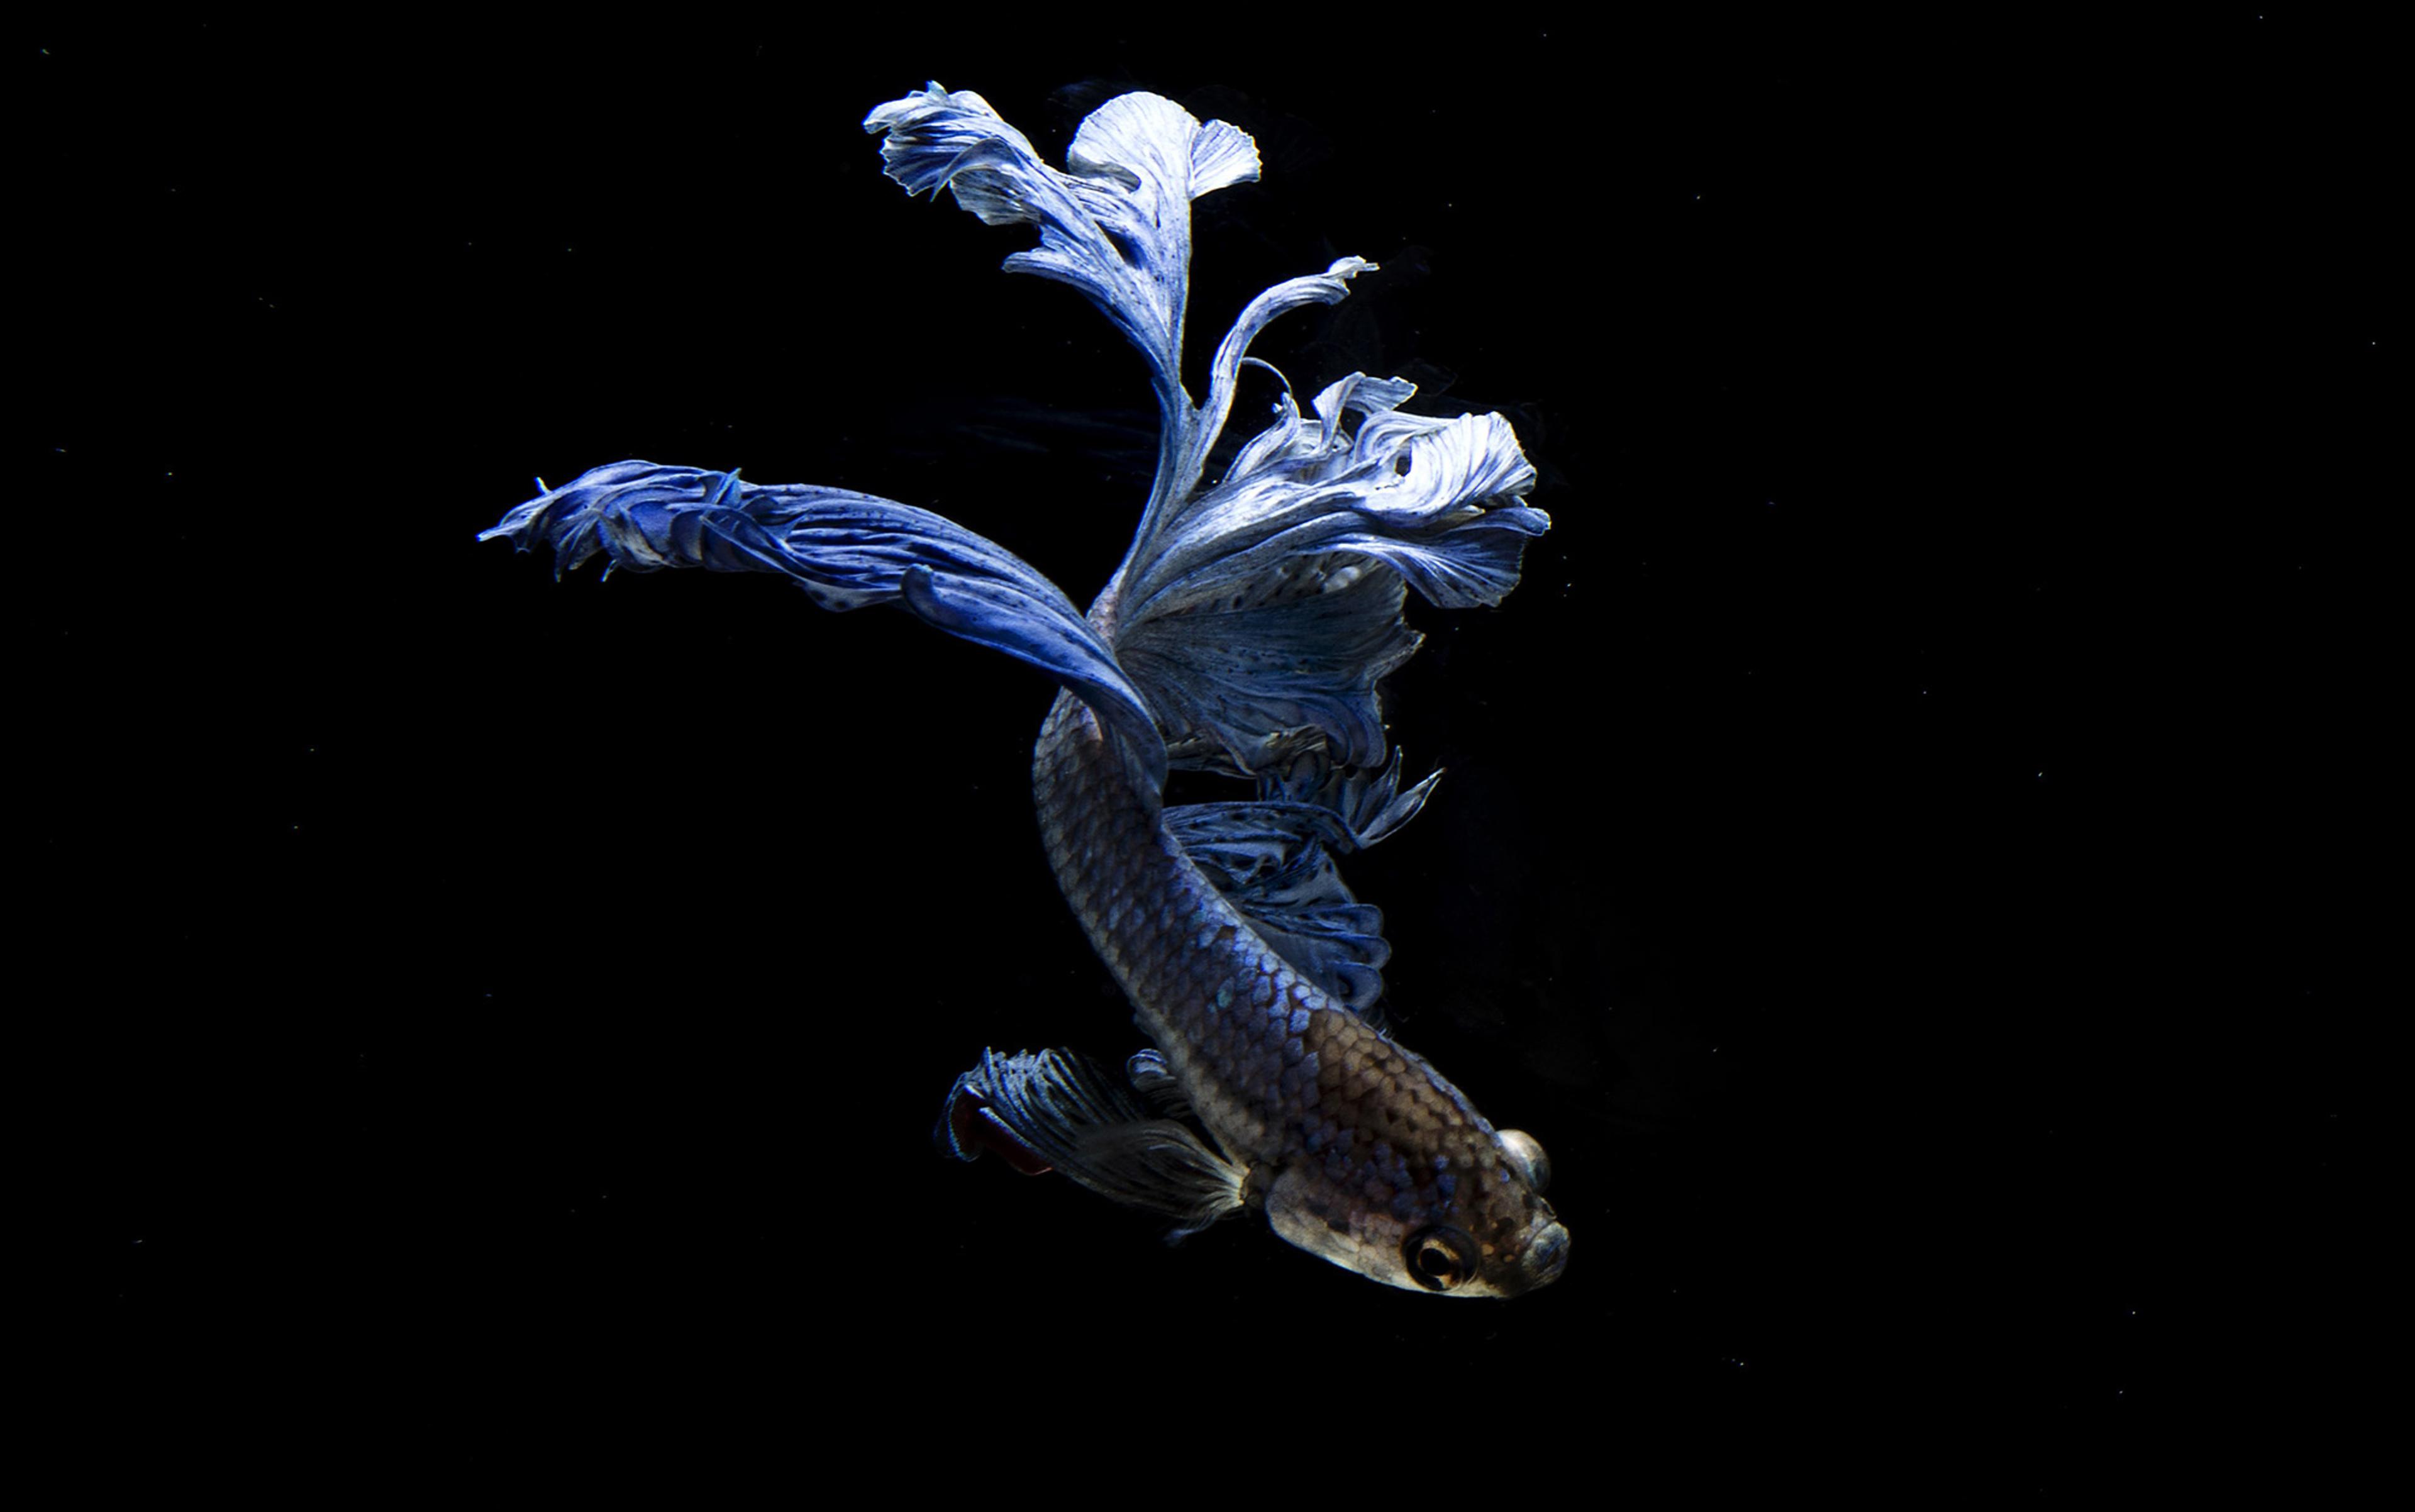 Blue Betta fish with flowing fins swimming in a black background.